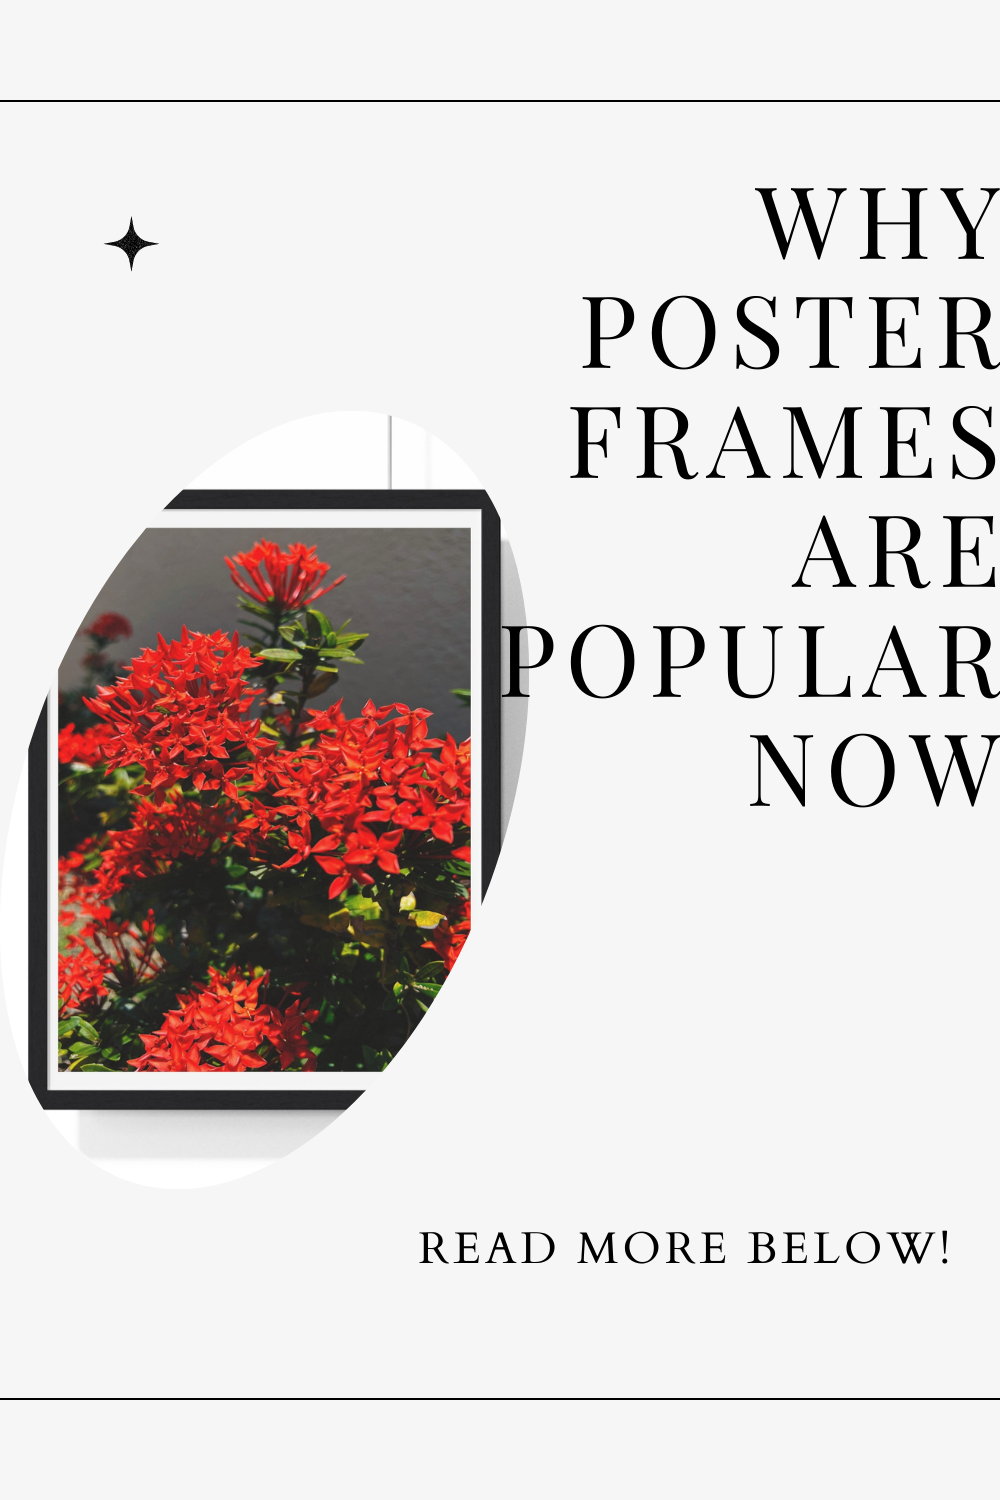 Why Poster Frames Are Popular Now